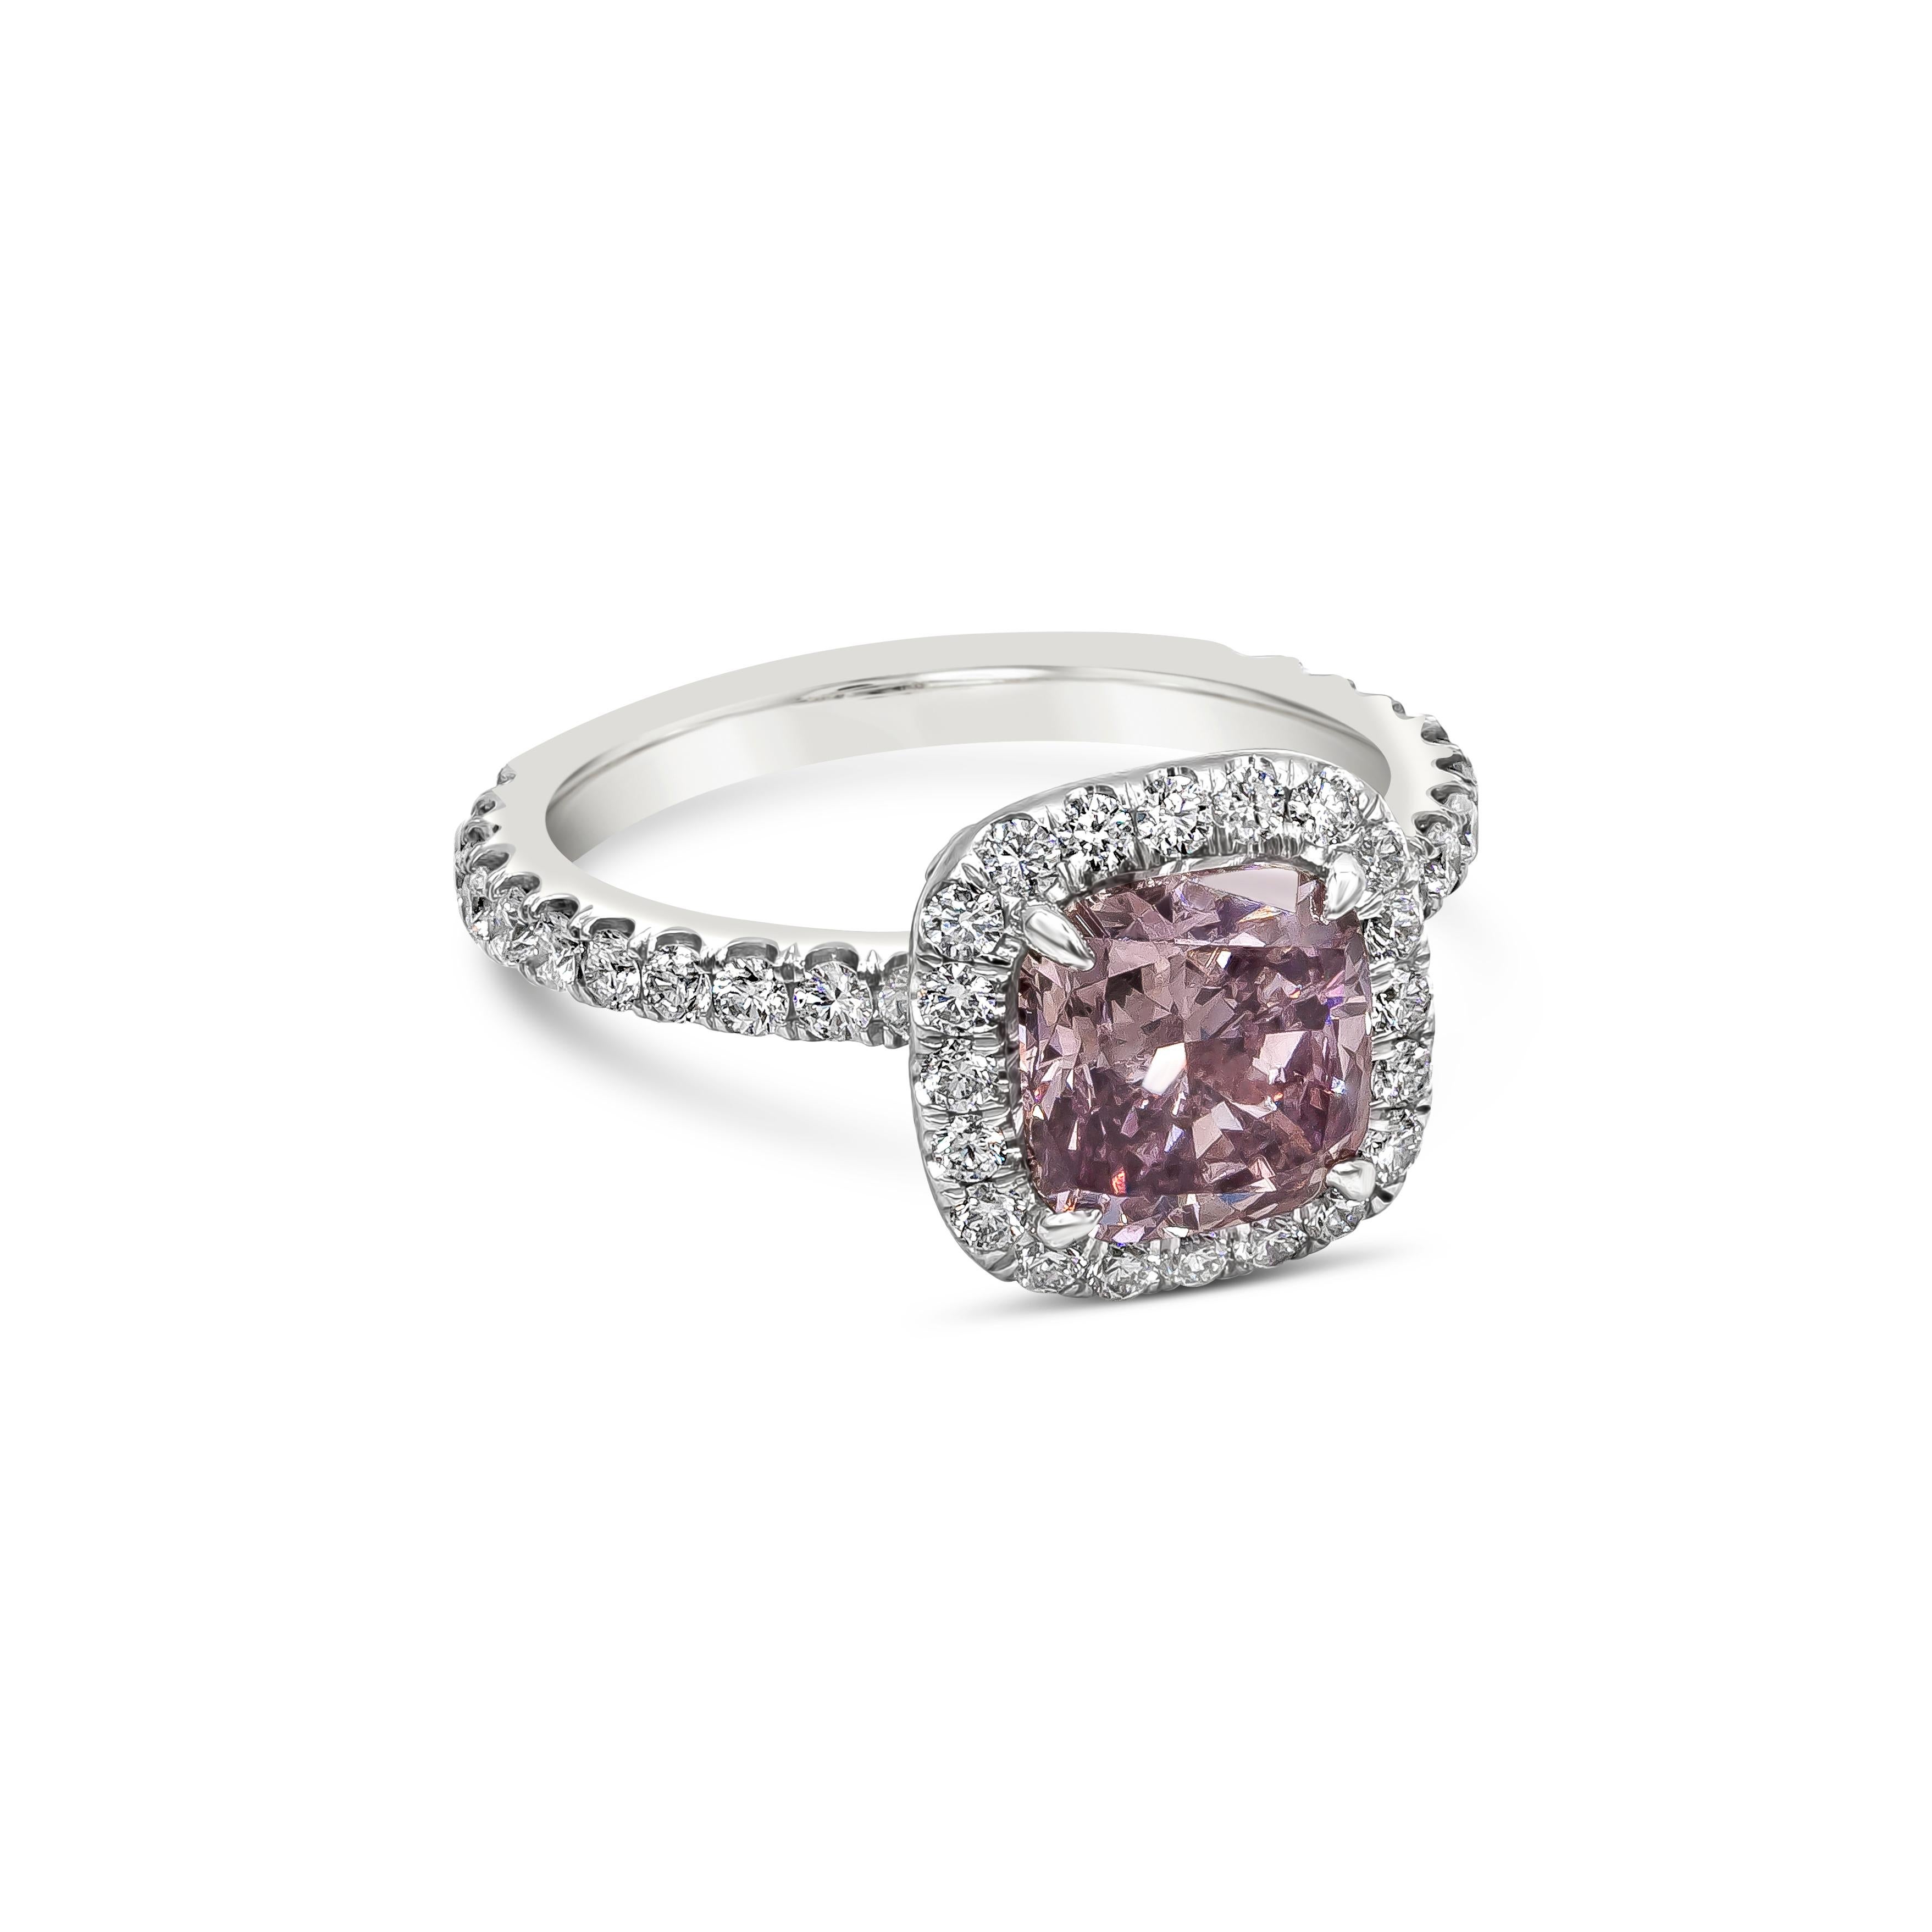 A rare color engagement ring showcasing a GIA Certified 2.16 carats cushion cut Fancy Dark Brown-Pink Color Diamond and SI2 in clarity. Surrounding the center stone is a row of halo round brilliant diamonds, and goes half way down the shank,